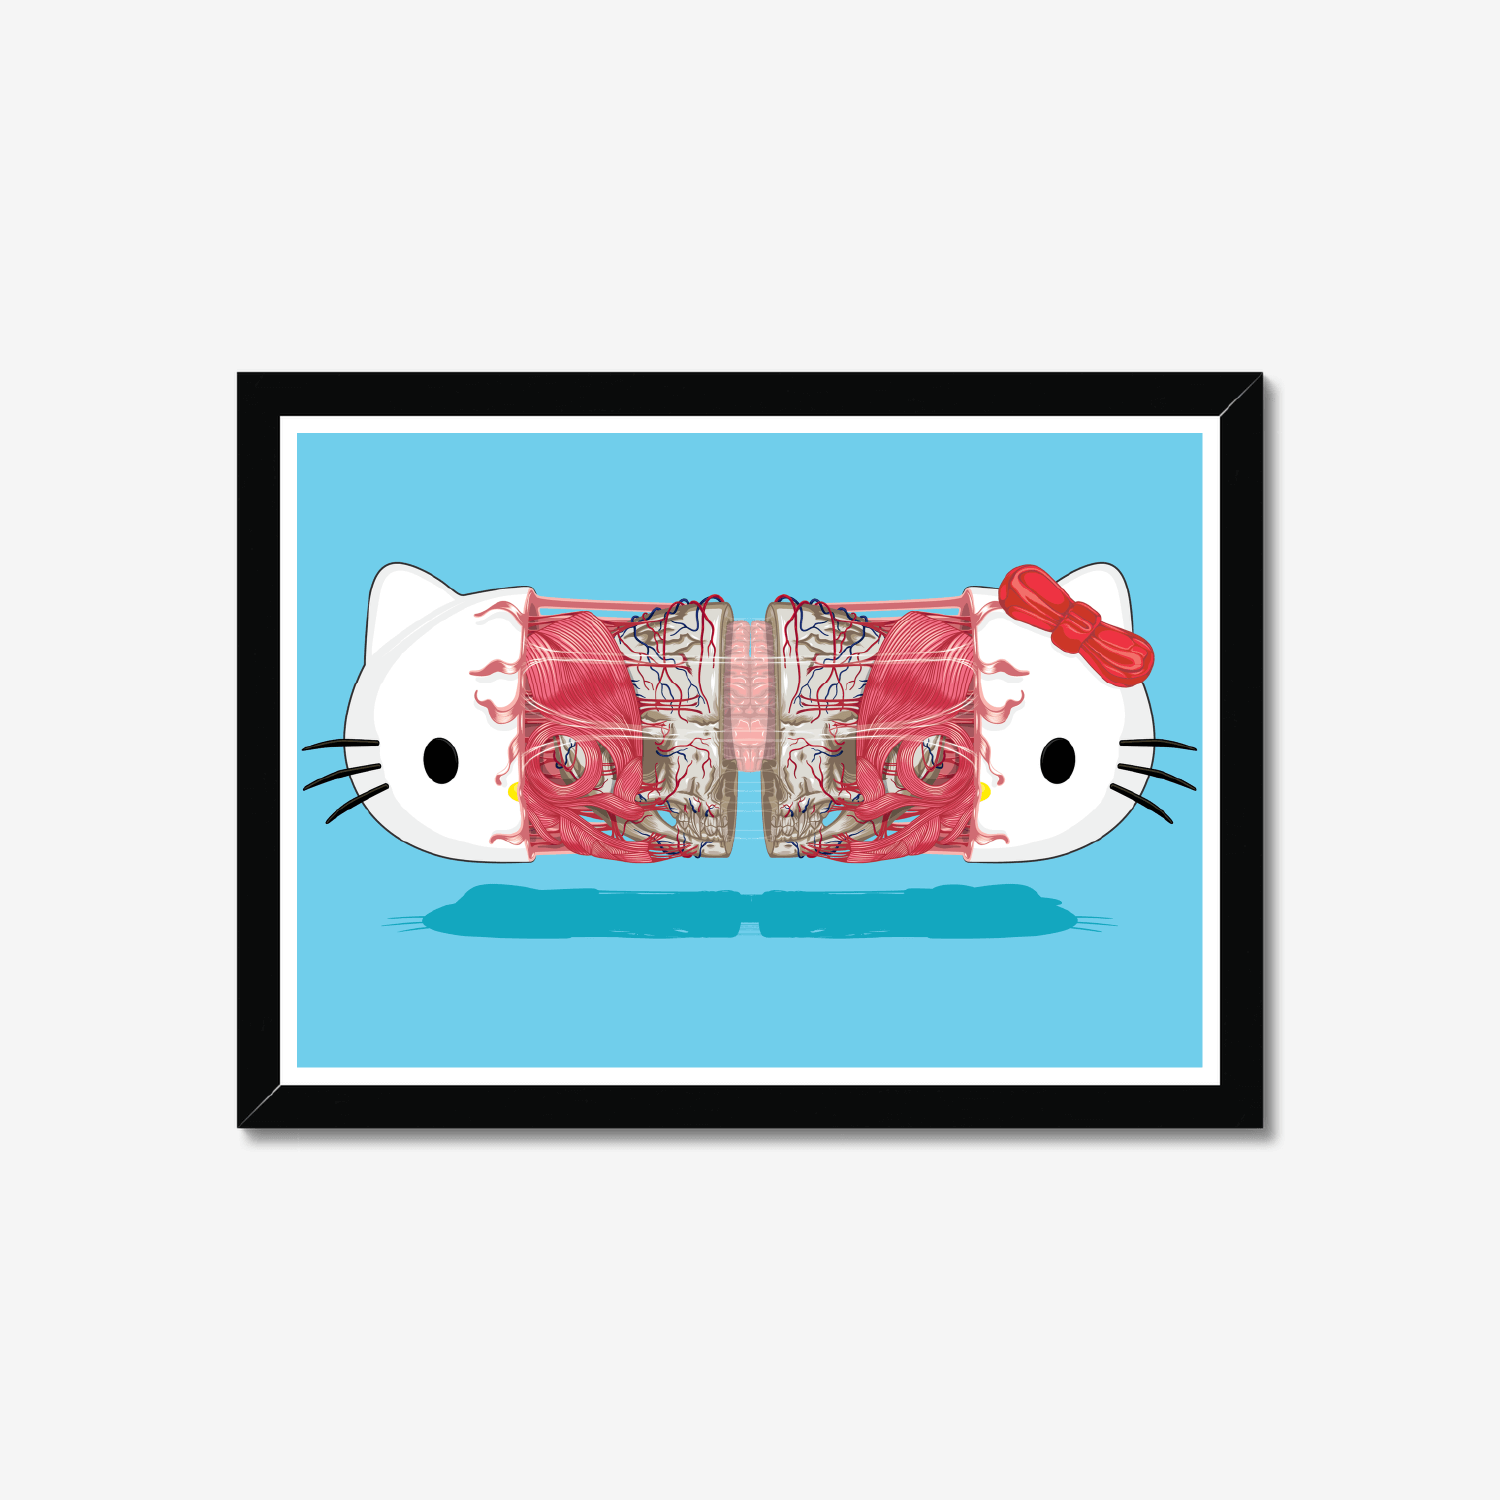 Hell No Kitty - Hello Kitty art print by Mr Nope — Nope - No